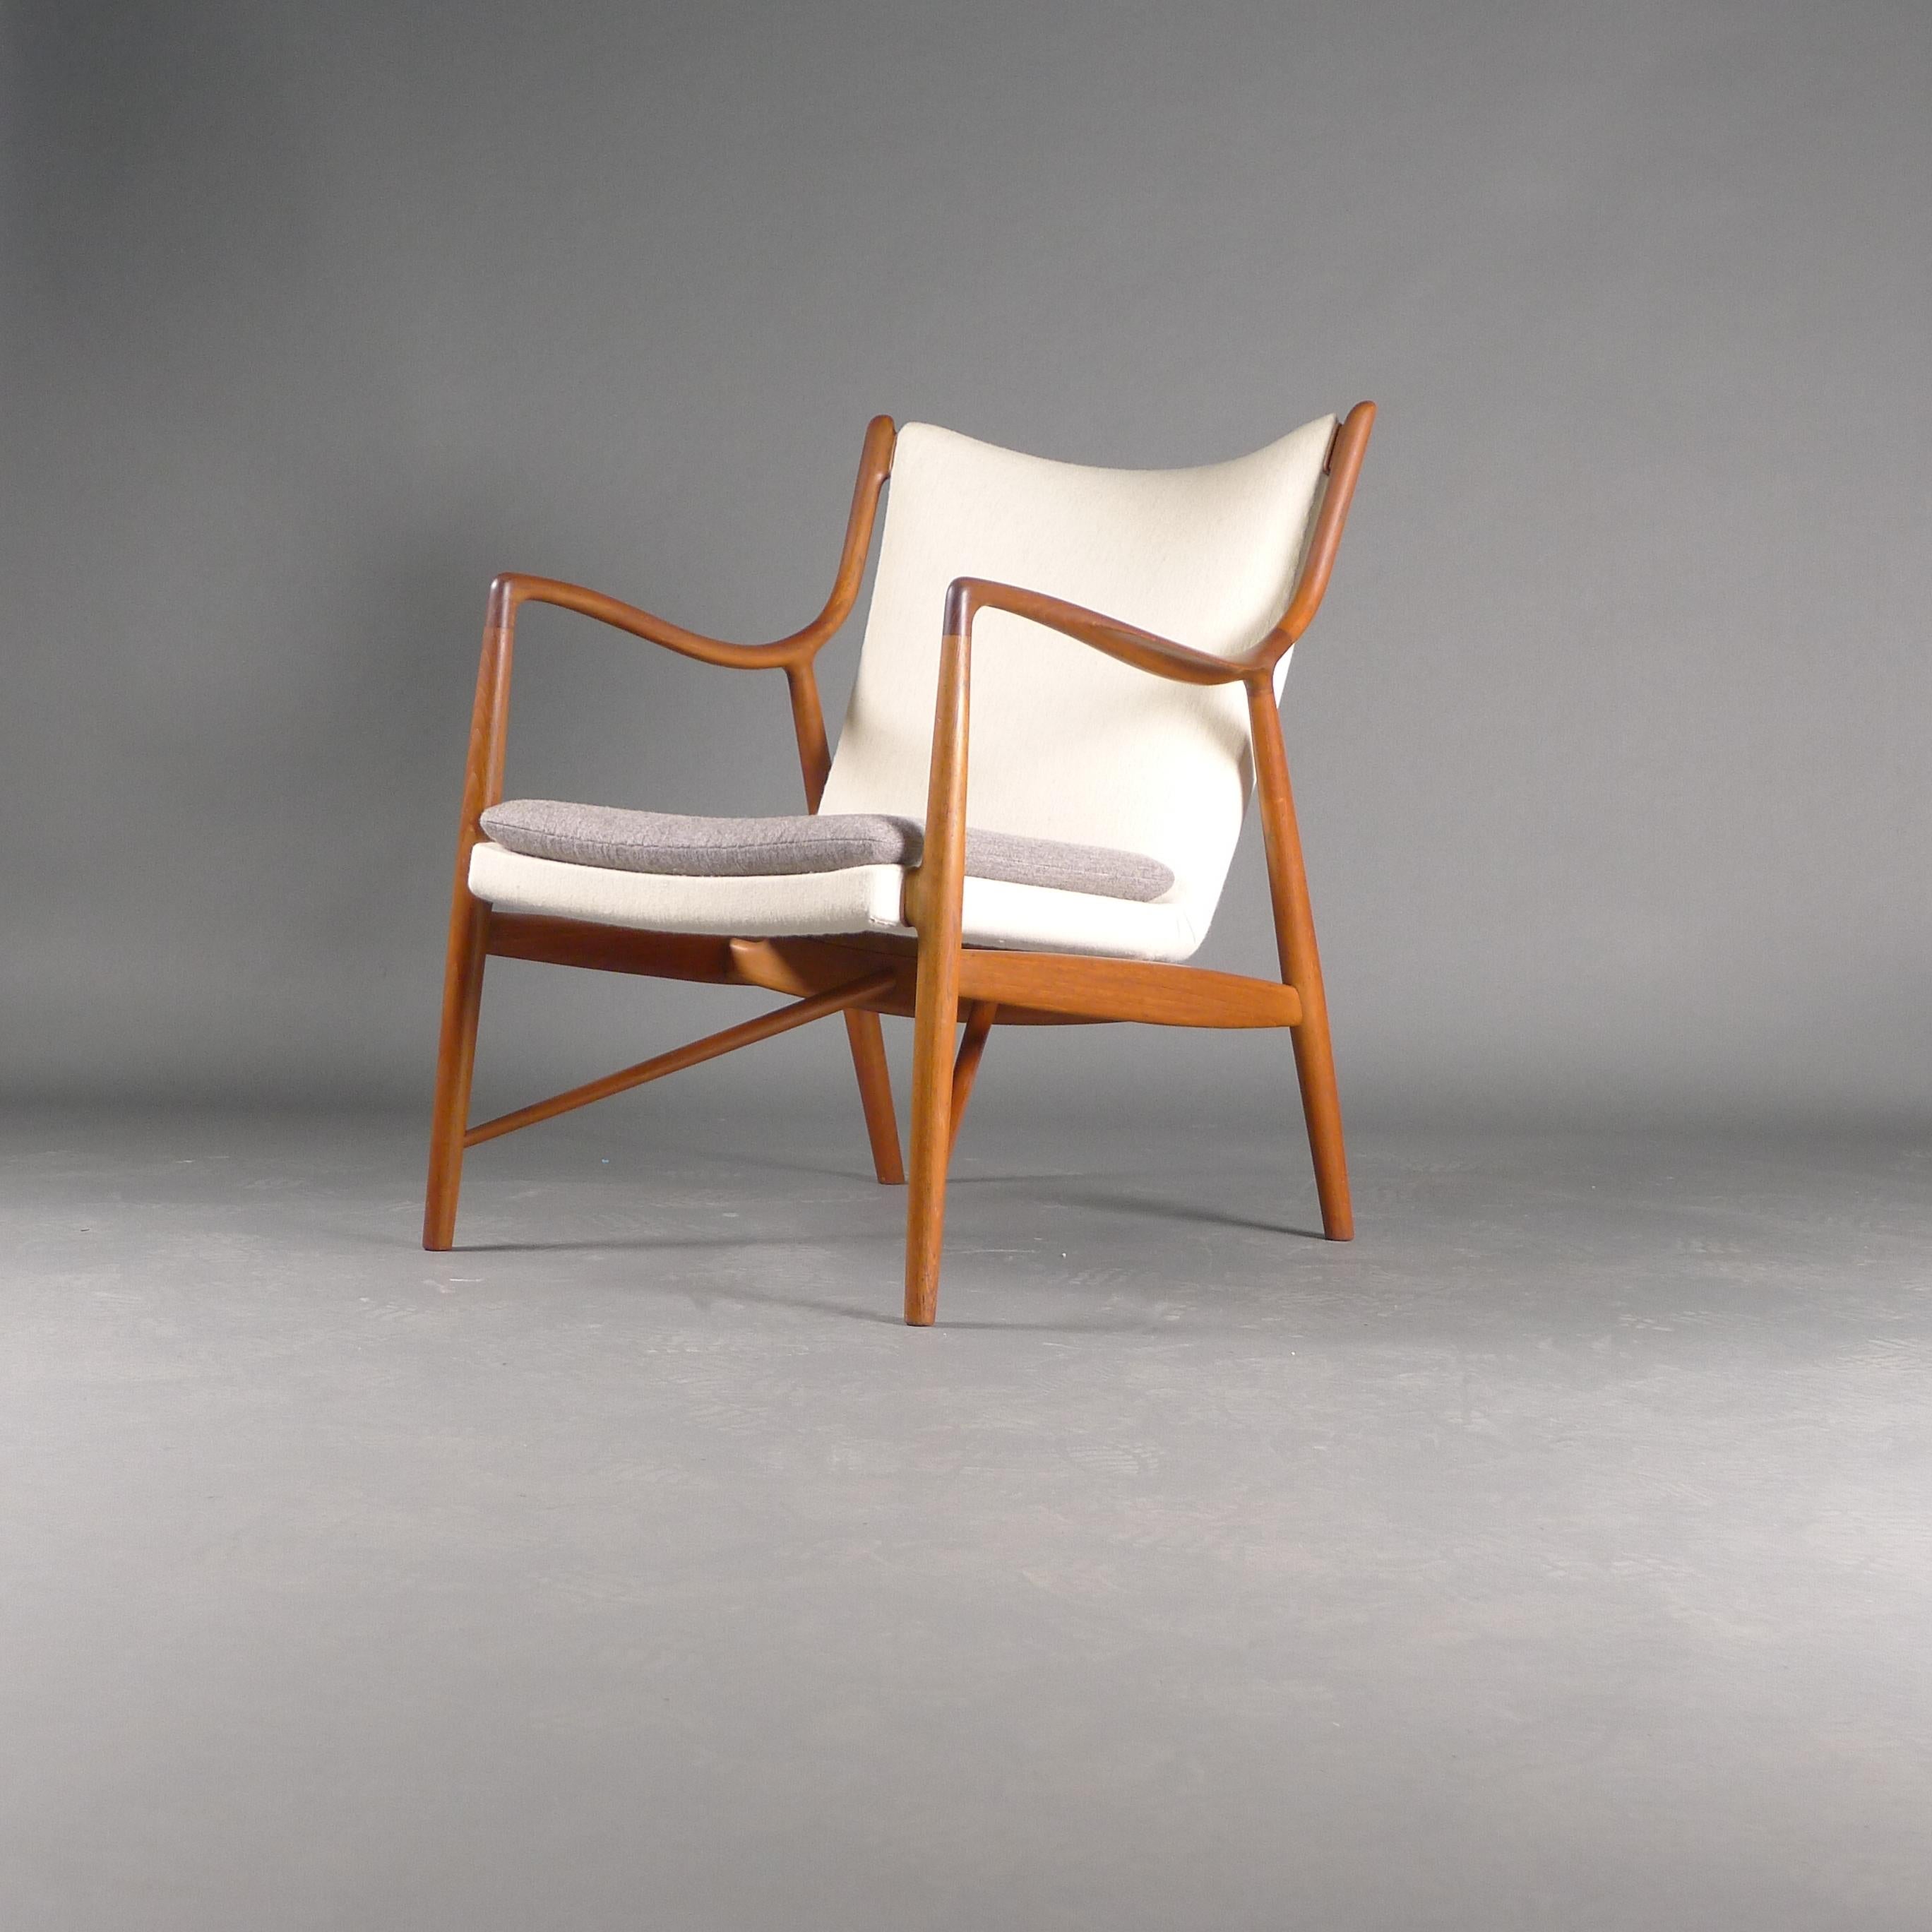 Mid-20th Century Model NV45 Easy Chair, Designed by Finn Juhl, Made by Niels Vodder, 1940s For Sale